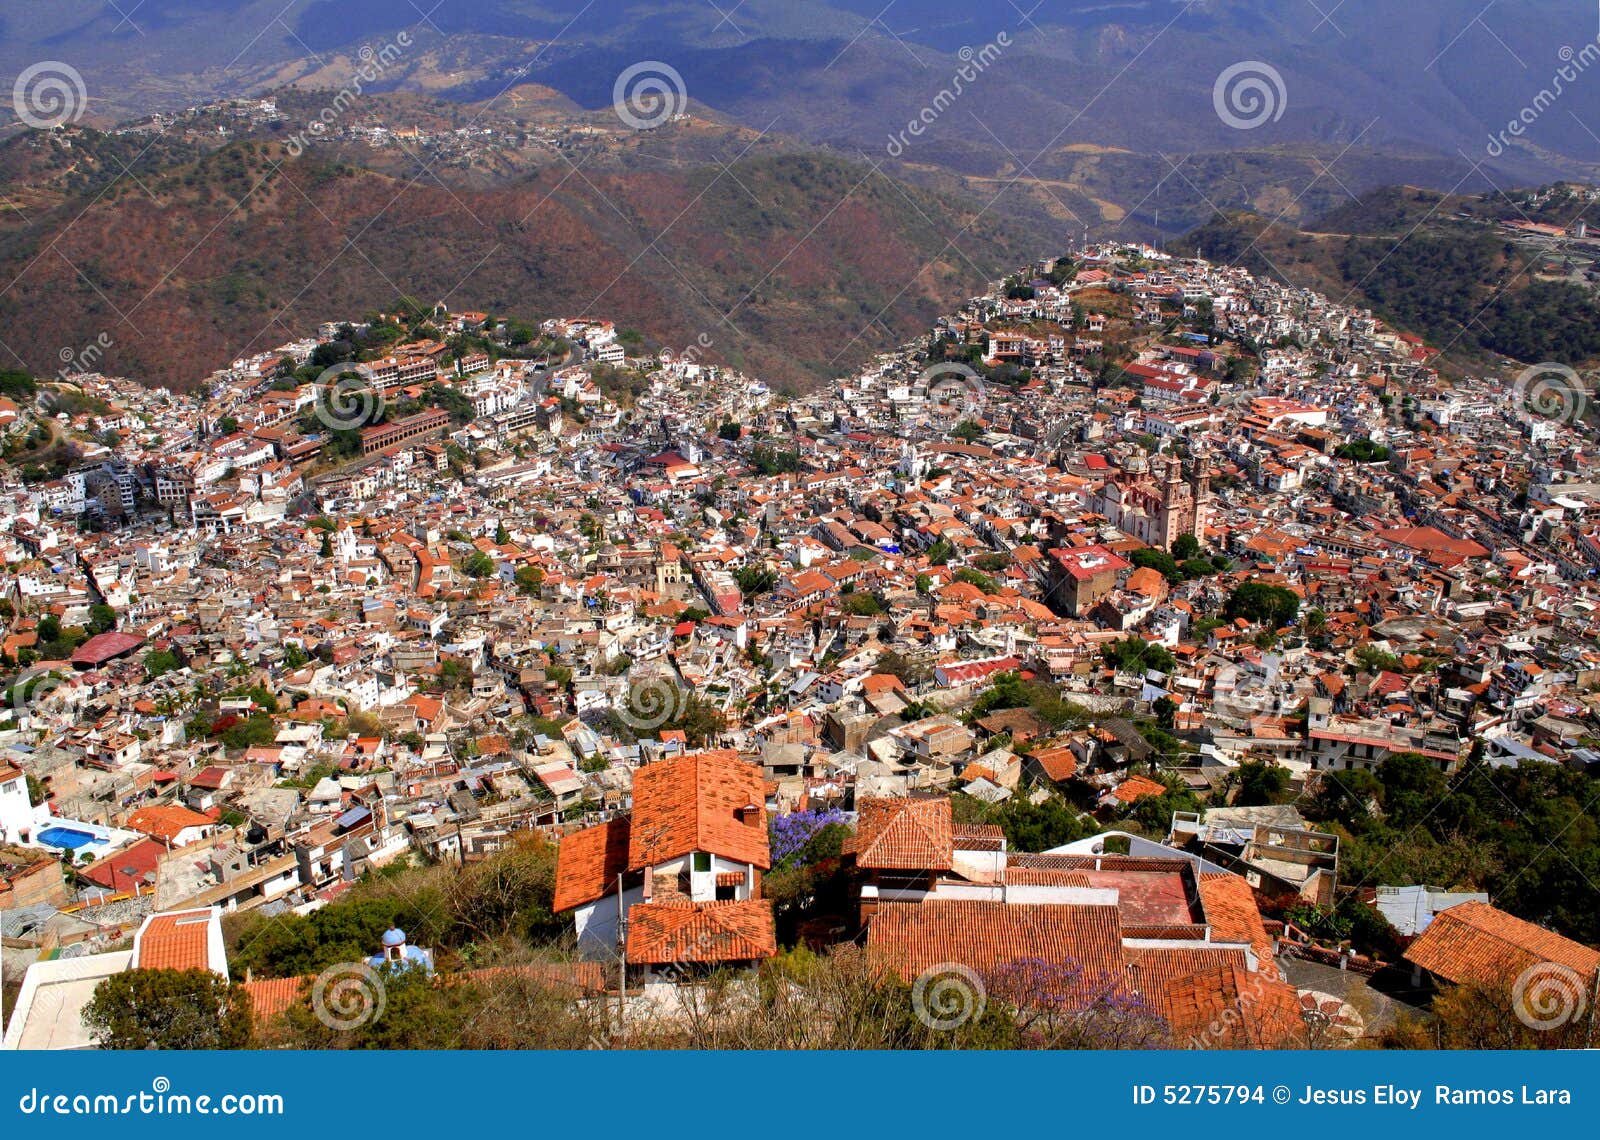 aerial view of the city of taxco, in guerrero ii